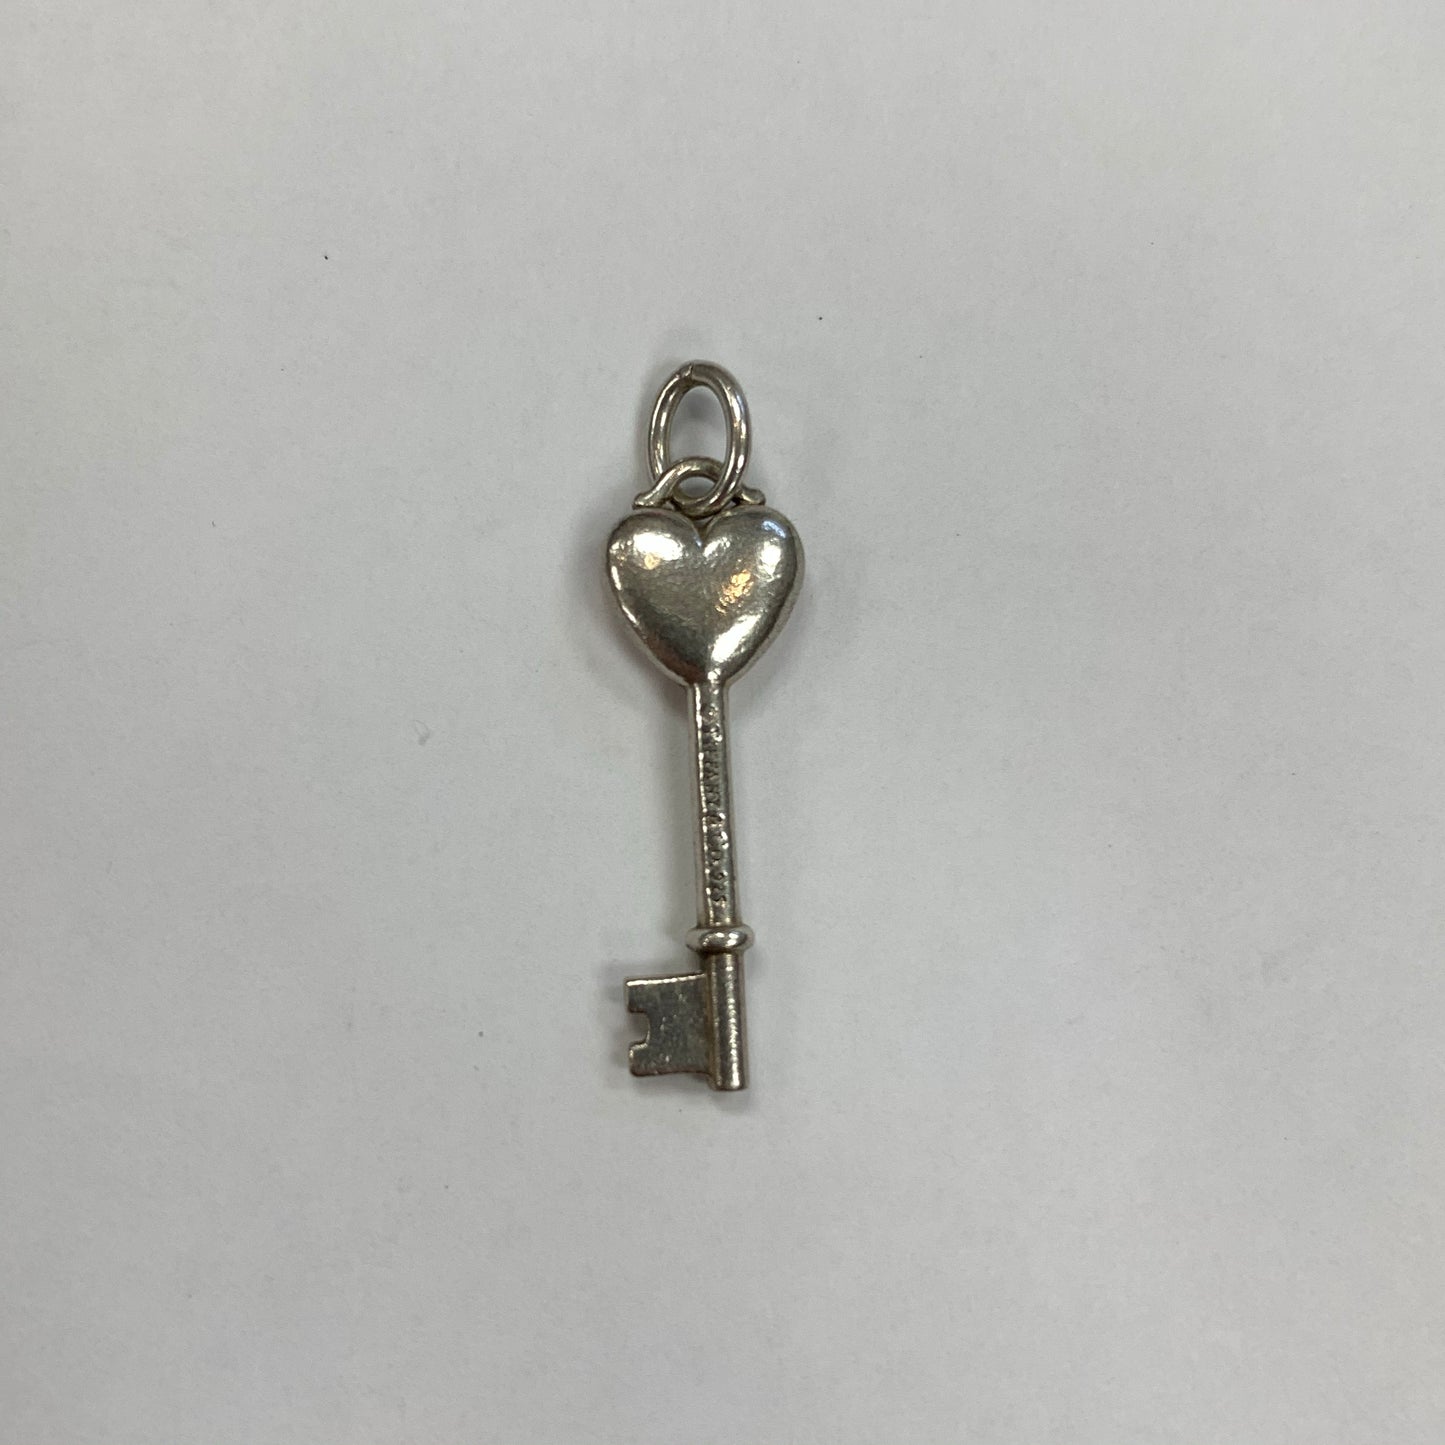 Authentic Tiffany Sterling Silver Pink Key Pendant